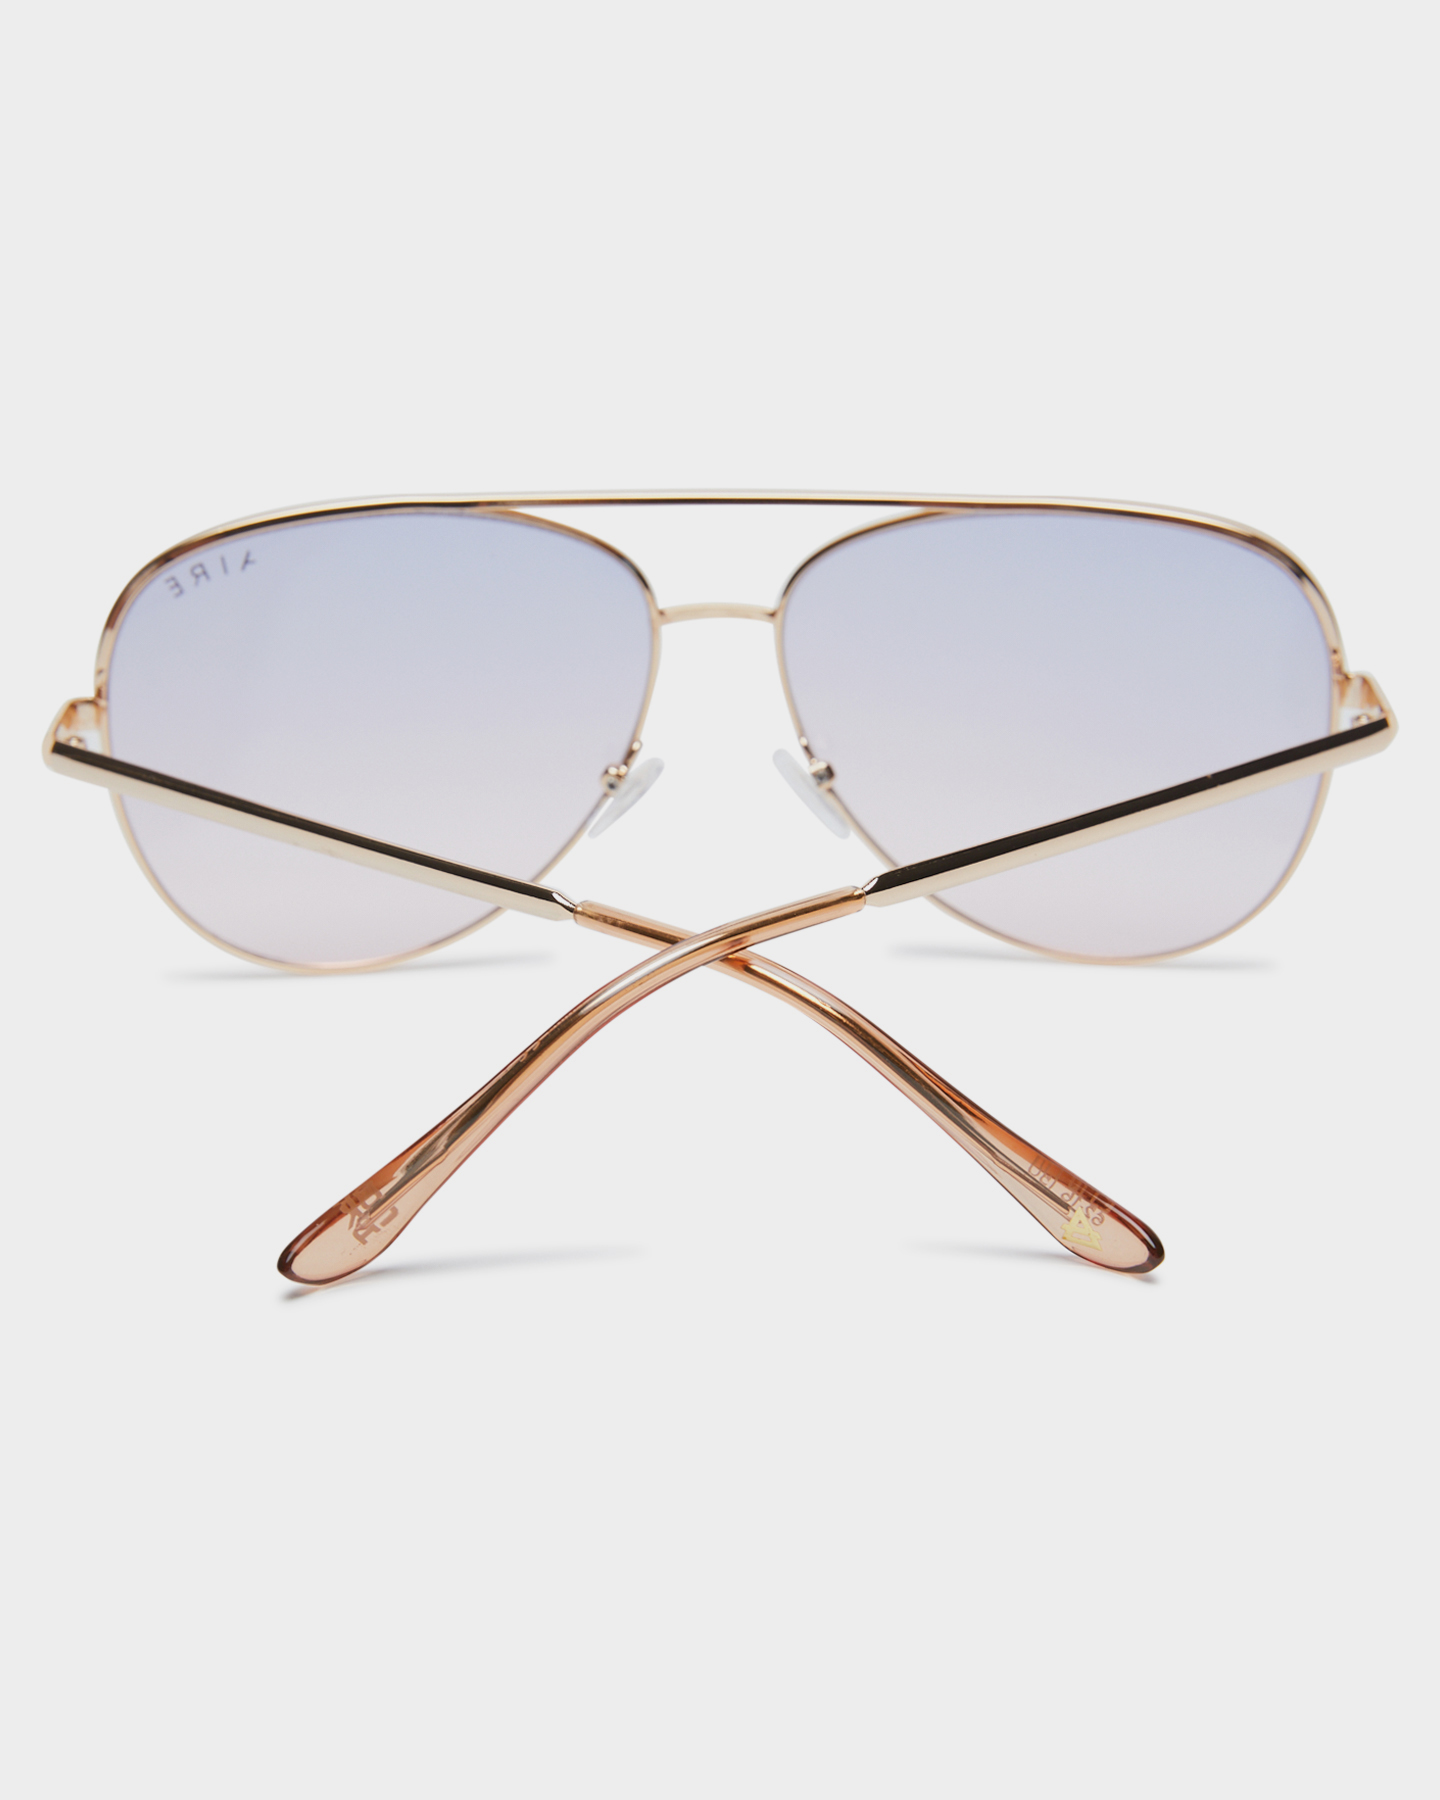 Aire Atmosphere V2 Sunglasses - Gold | SurfStitch